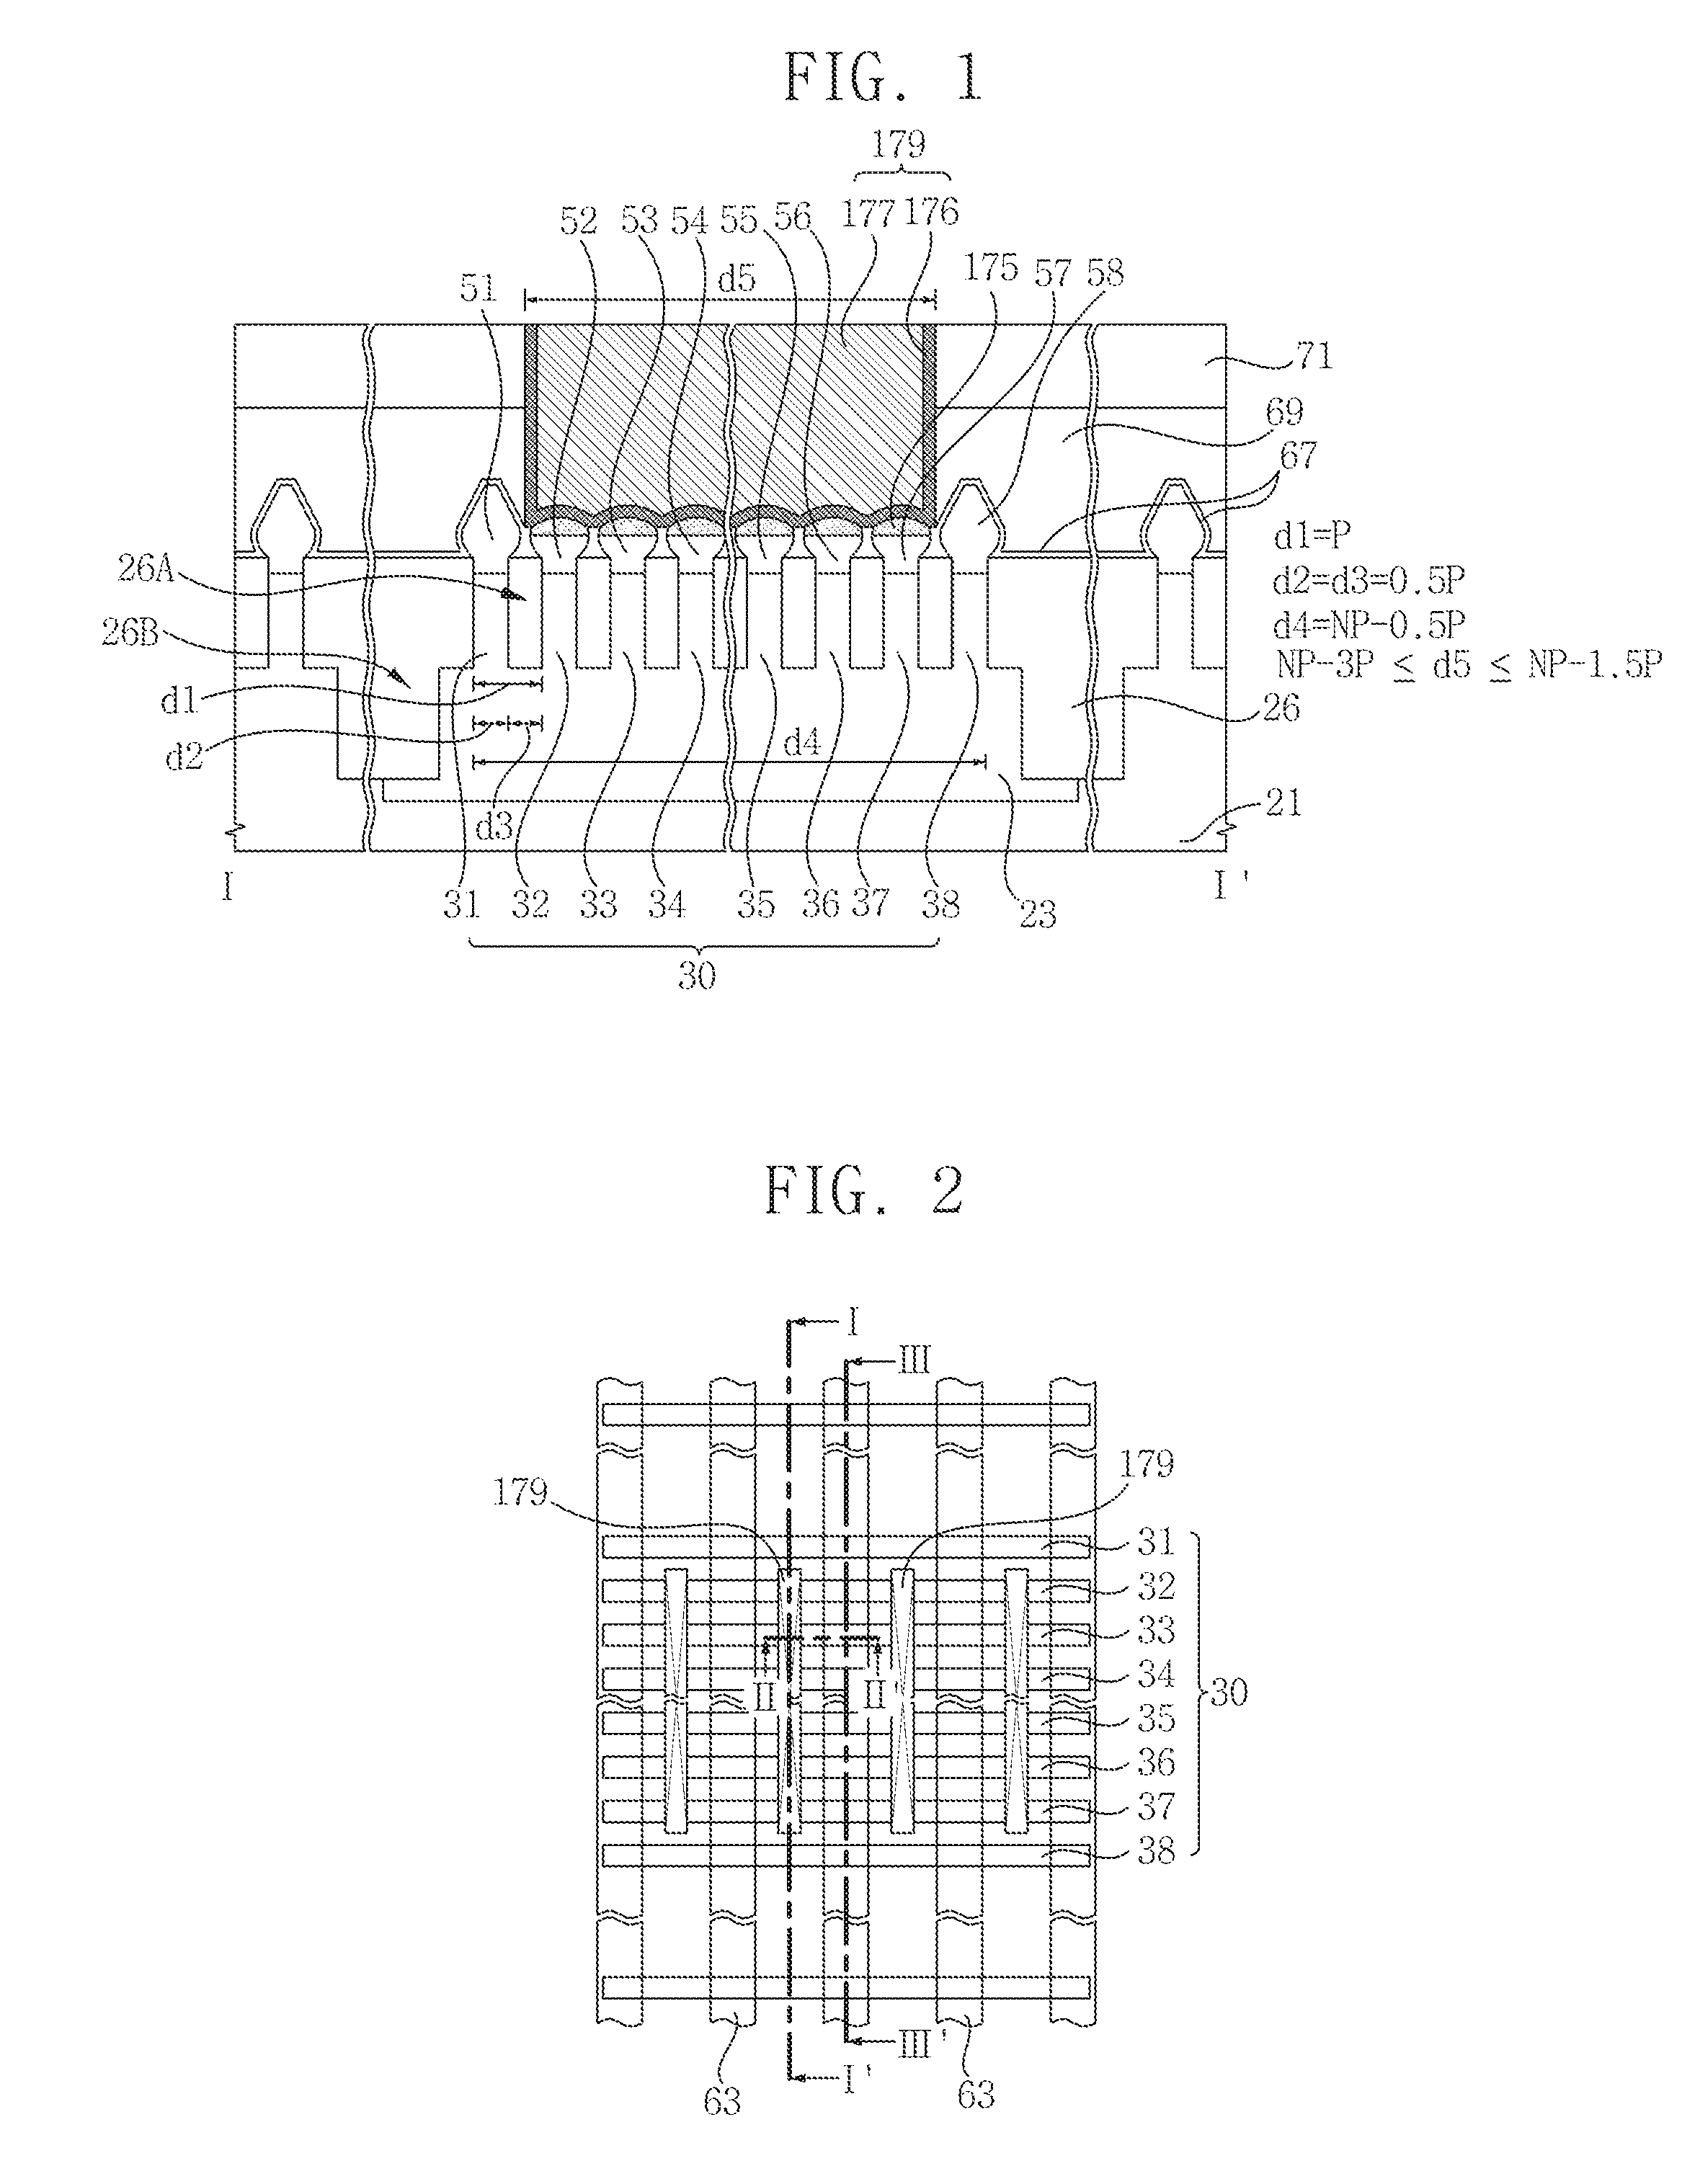 Semiconductor device having contact plug and method of forming the same